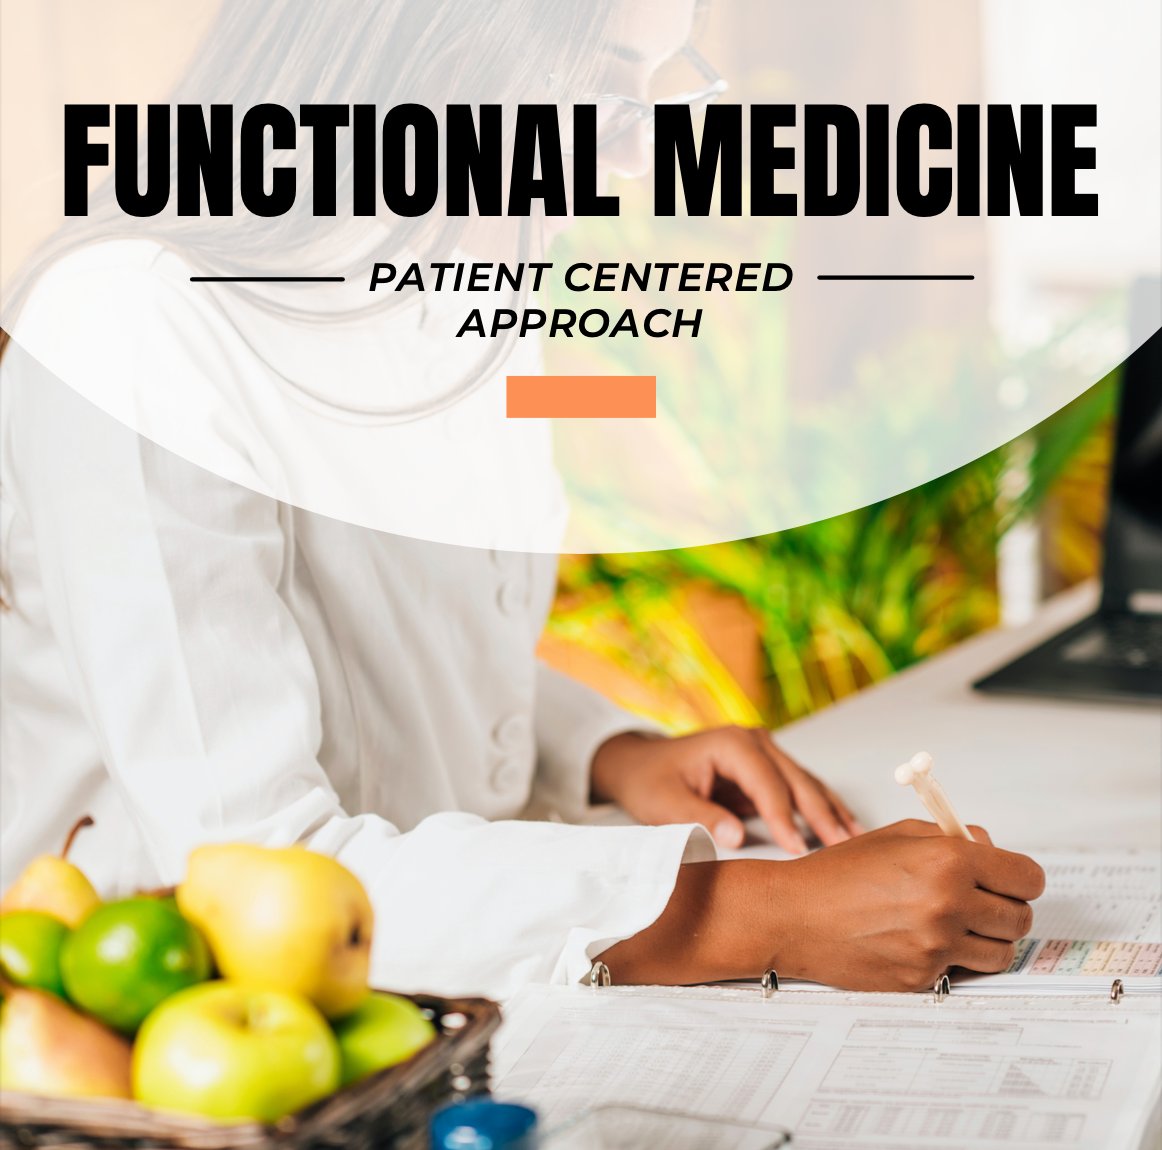 Functional Medicine is an individualized, patient centered approach that enables us to work together to address the core causes of disease and promote optimal wellness. 

#functionalmedicine #rootcause #patientcentered #individualized #optimalwellness